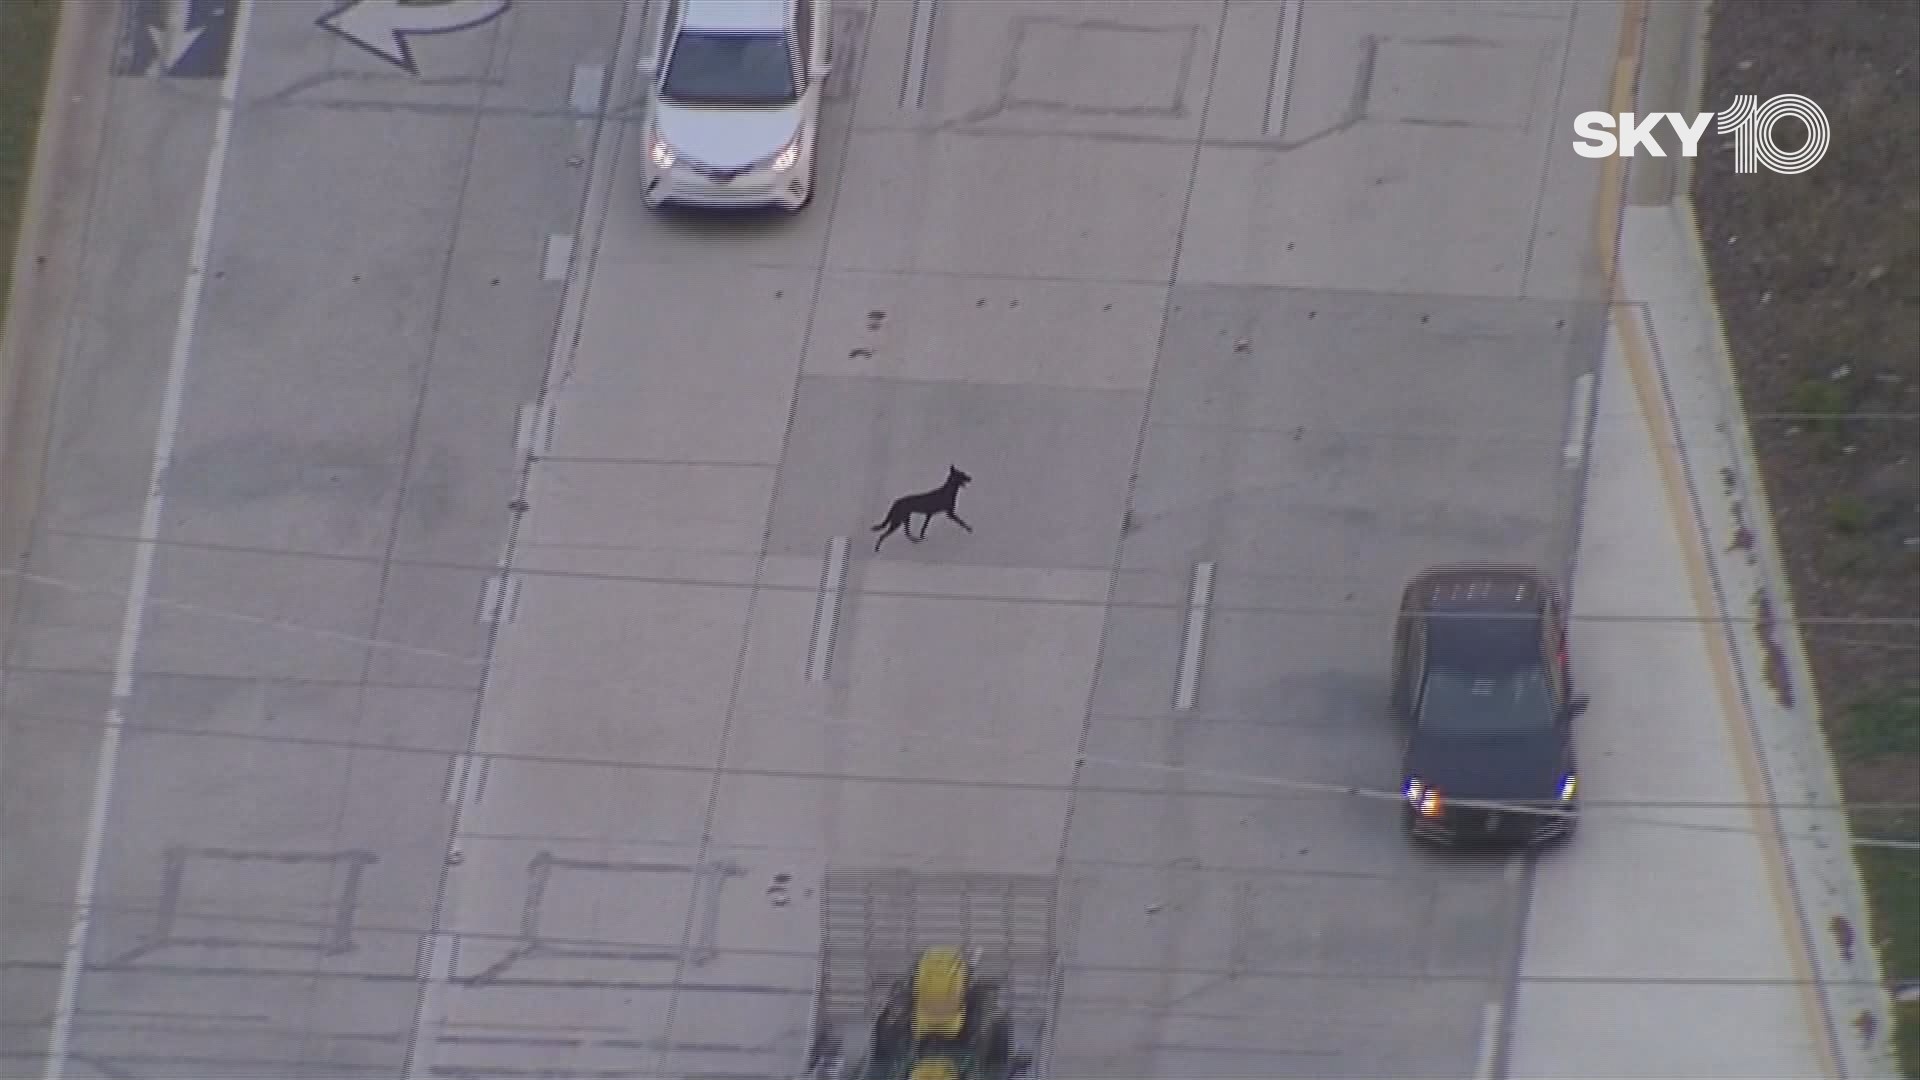 A dog got loose after his owner caused a four-car crash on N. Dale Mabry Hwy in Tampa, police said Tuesday morning.